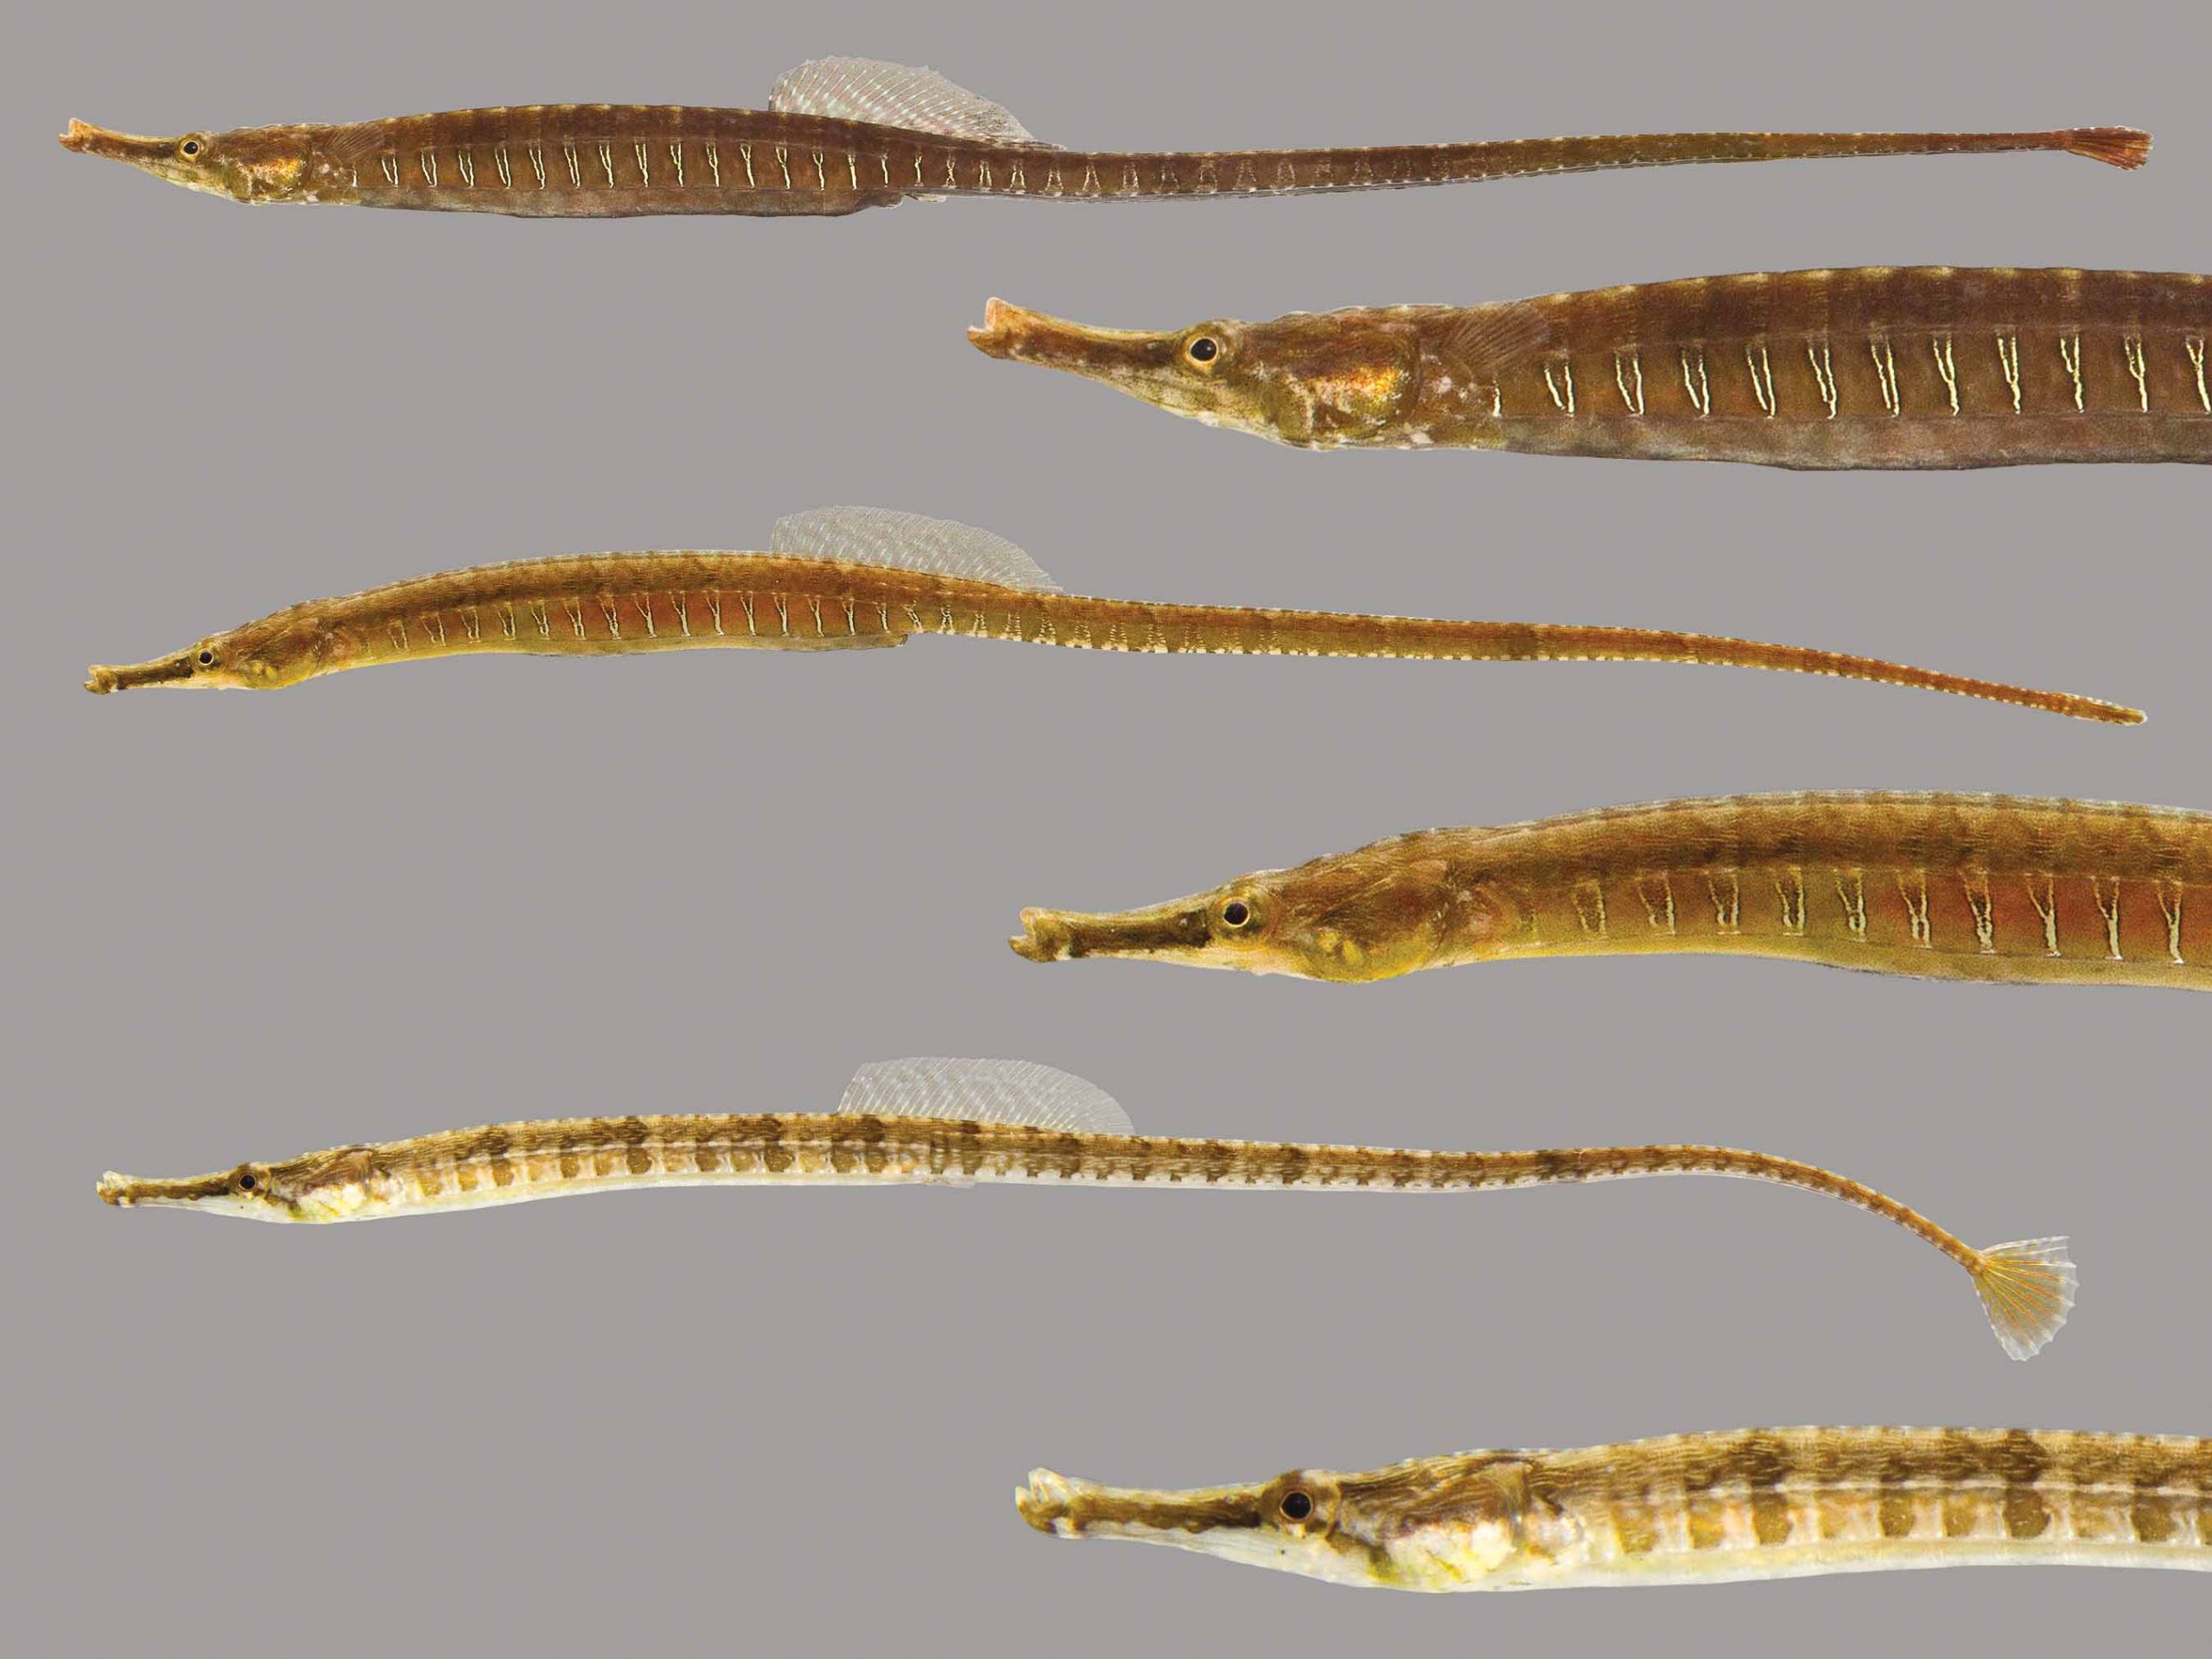 Lateral view of Gulf pipefish